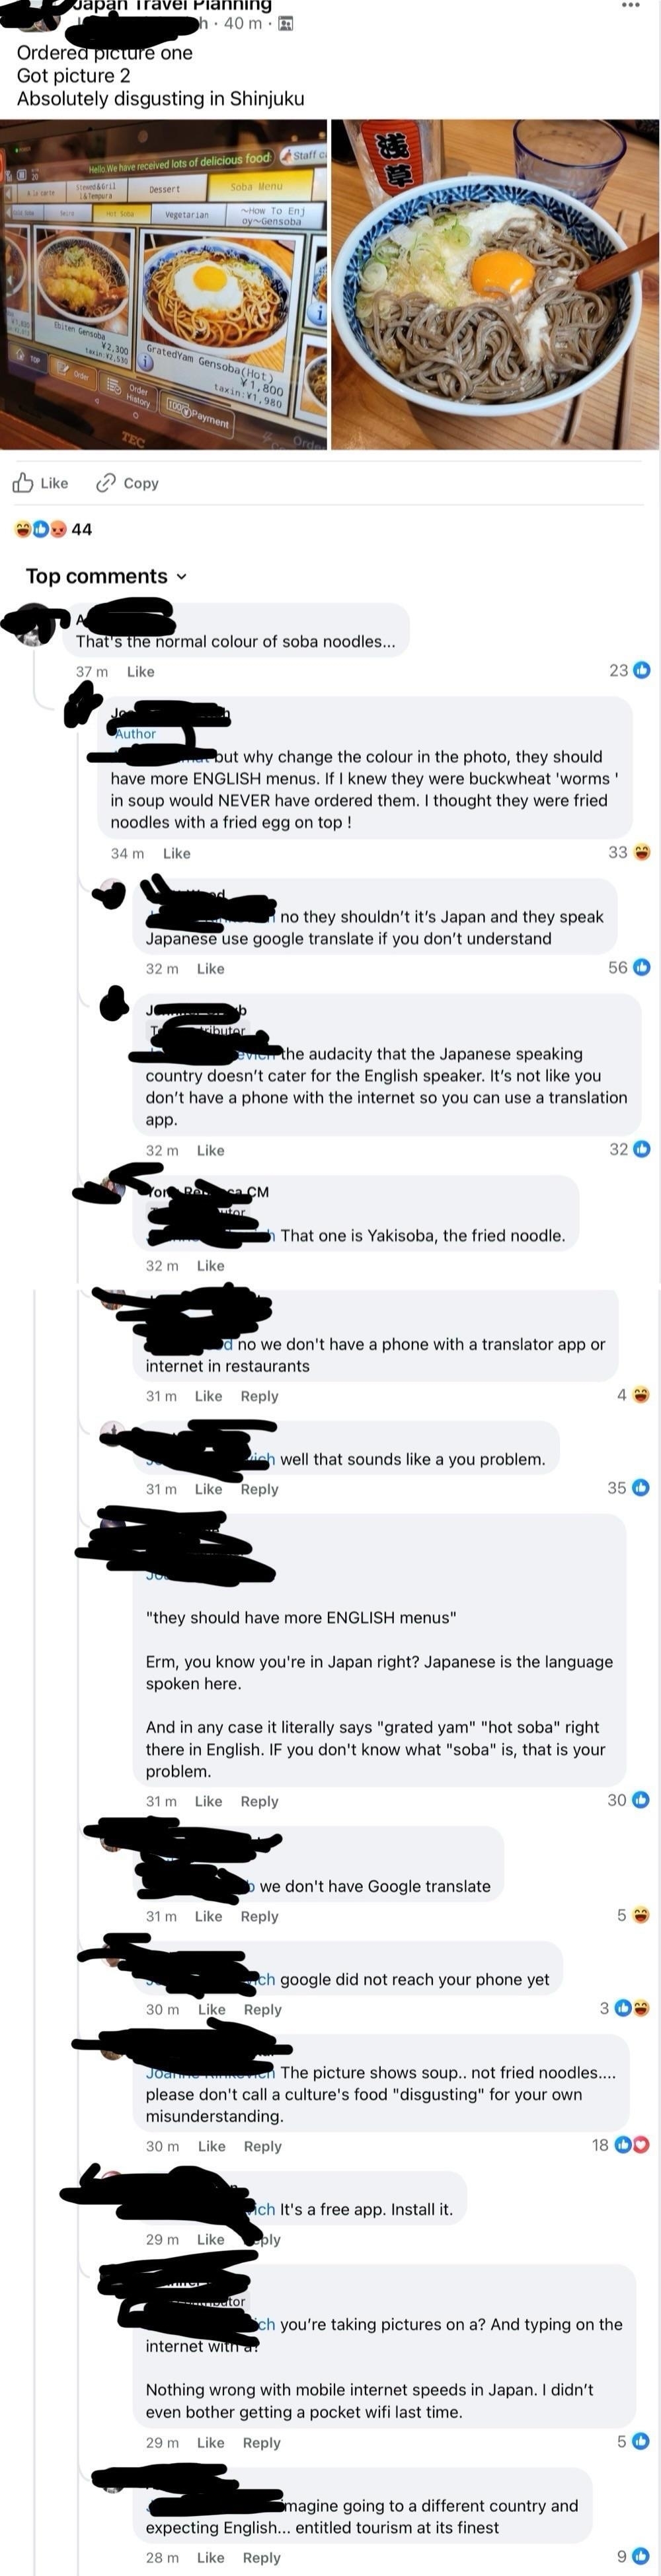 Facebook post showing a food photo and comments about ordering bad food in Tokyo. Arguments ensue about language barriers and translation apps